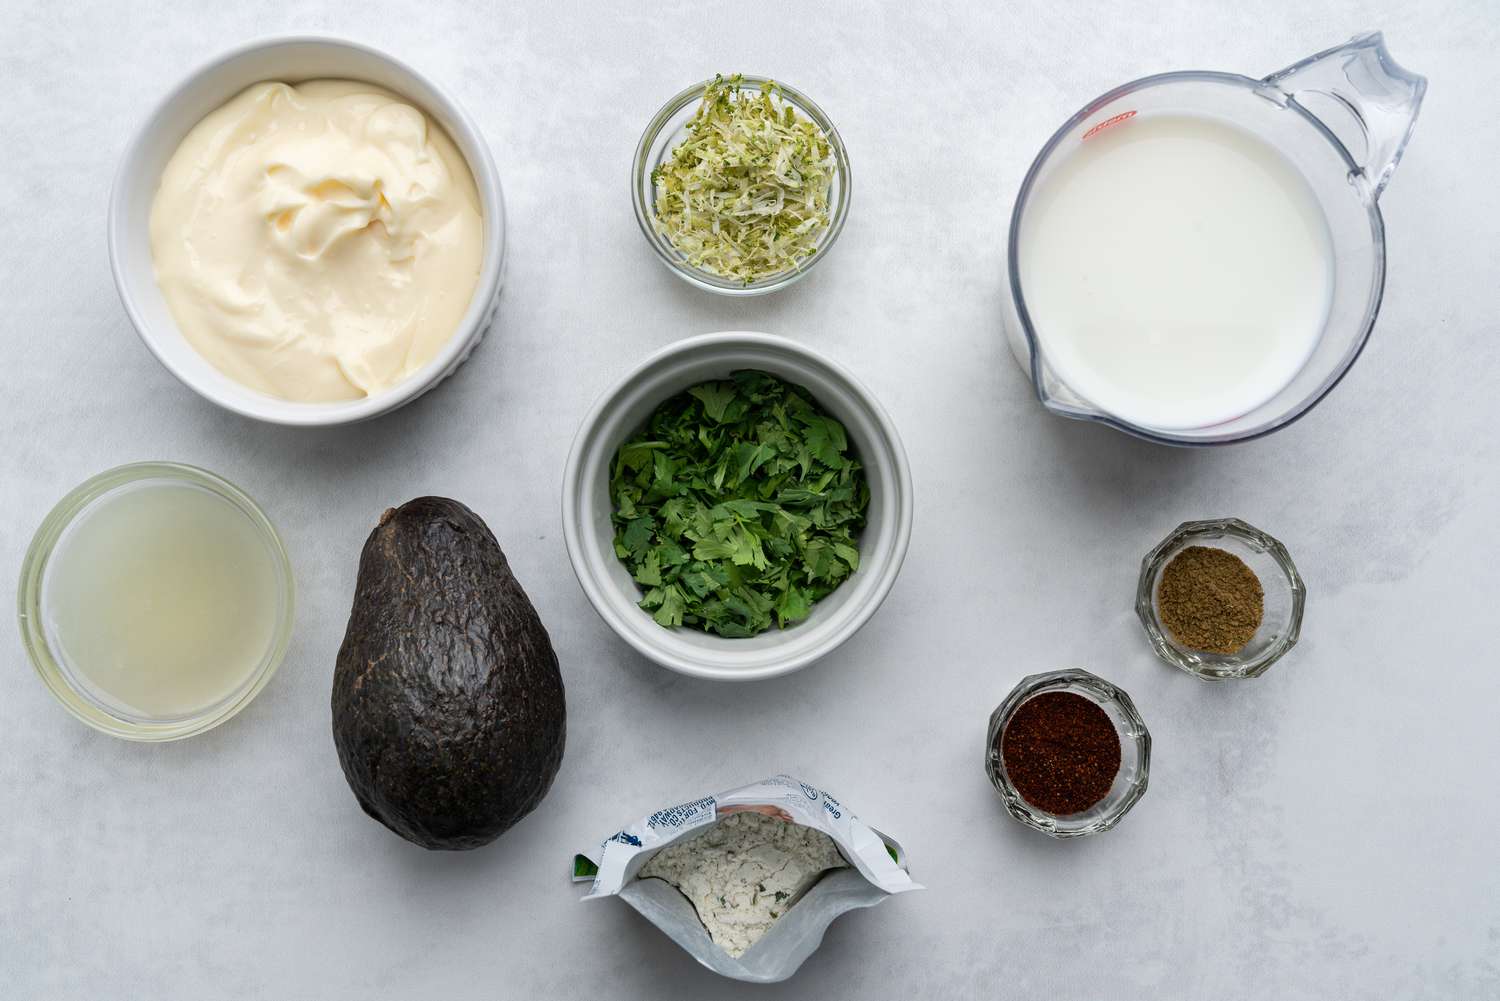 Chick-fil-a Avocado Lime Ranch Dressing ingredients